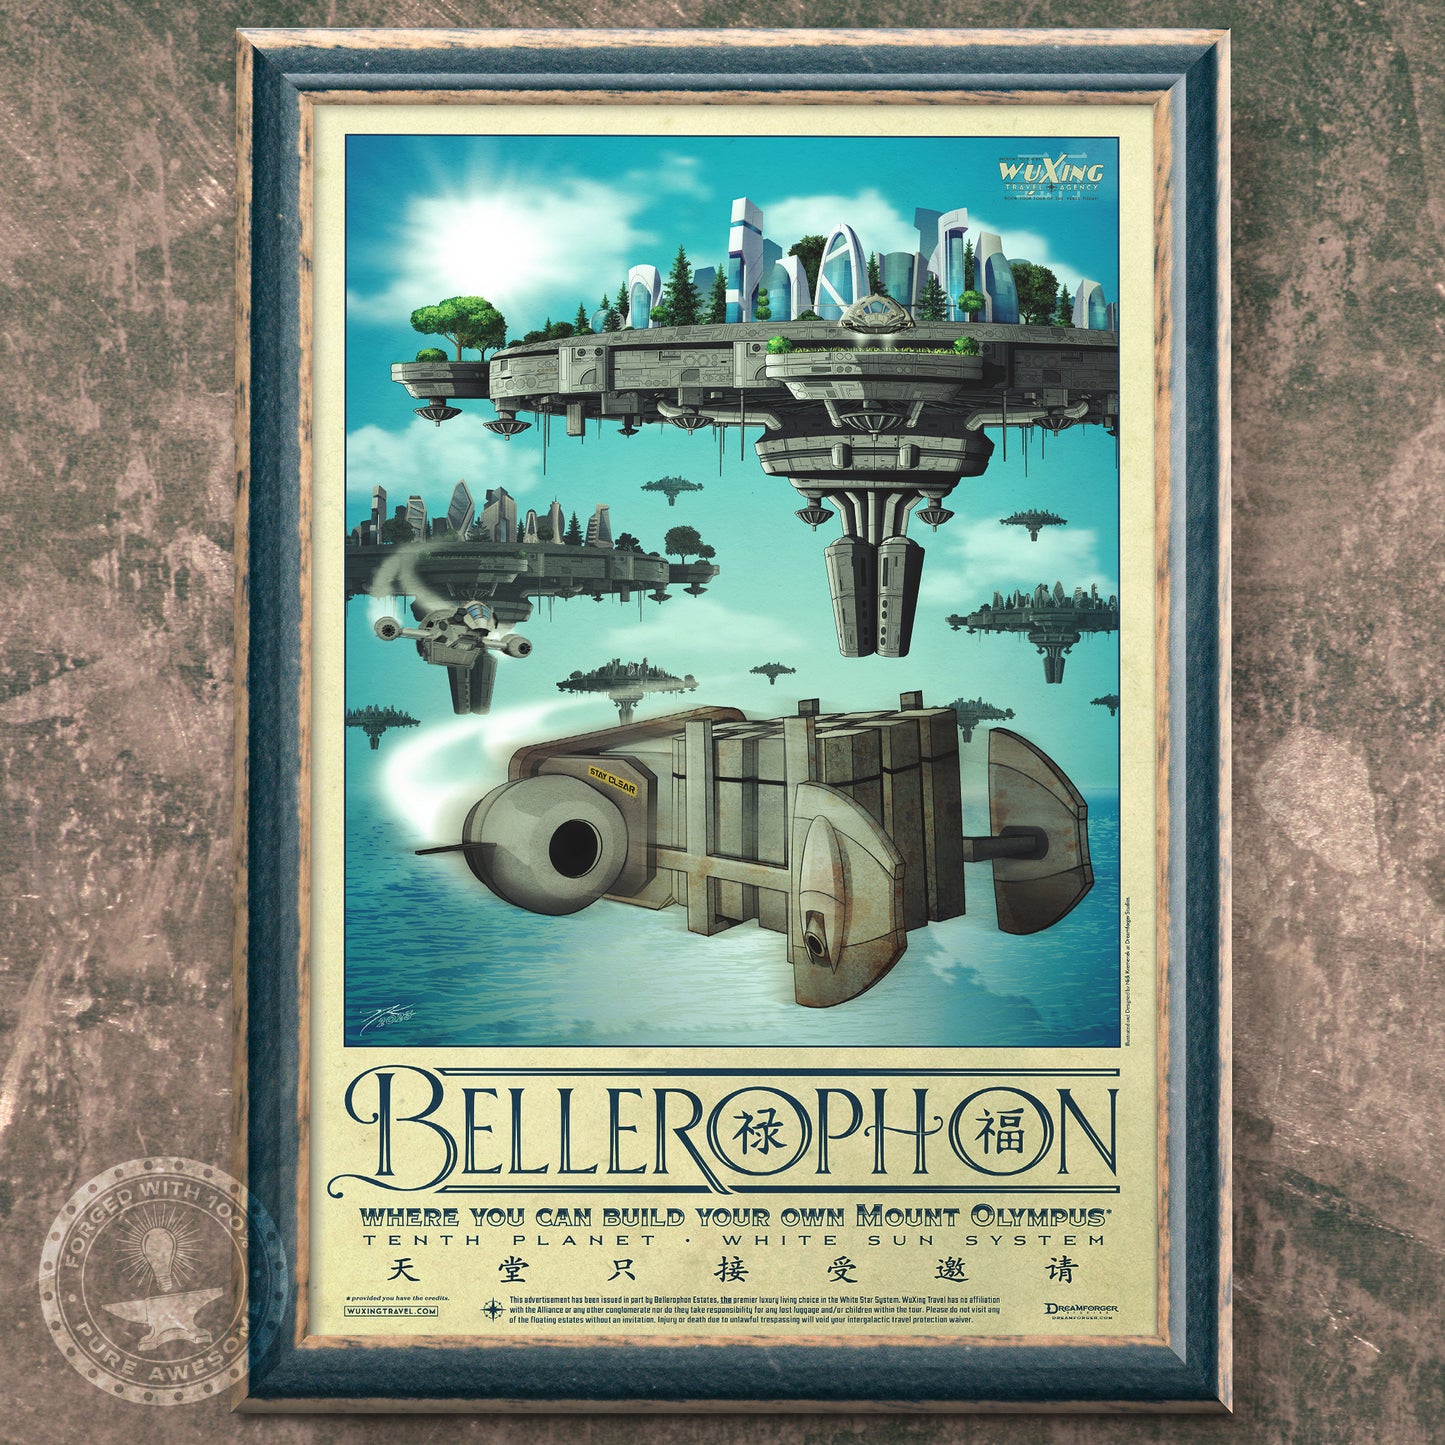 "Bellerophon" Planetary Travel Poster (WuXing Travel Agency series)